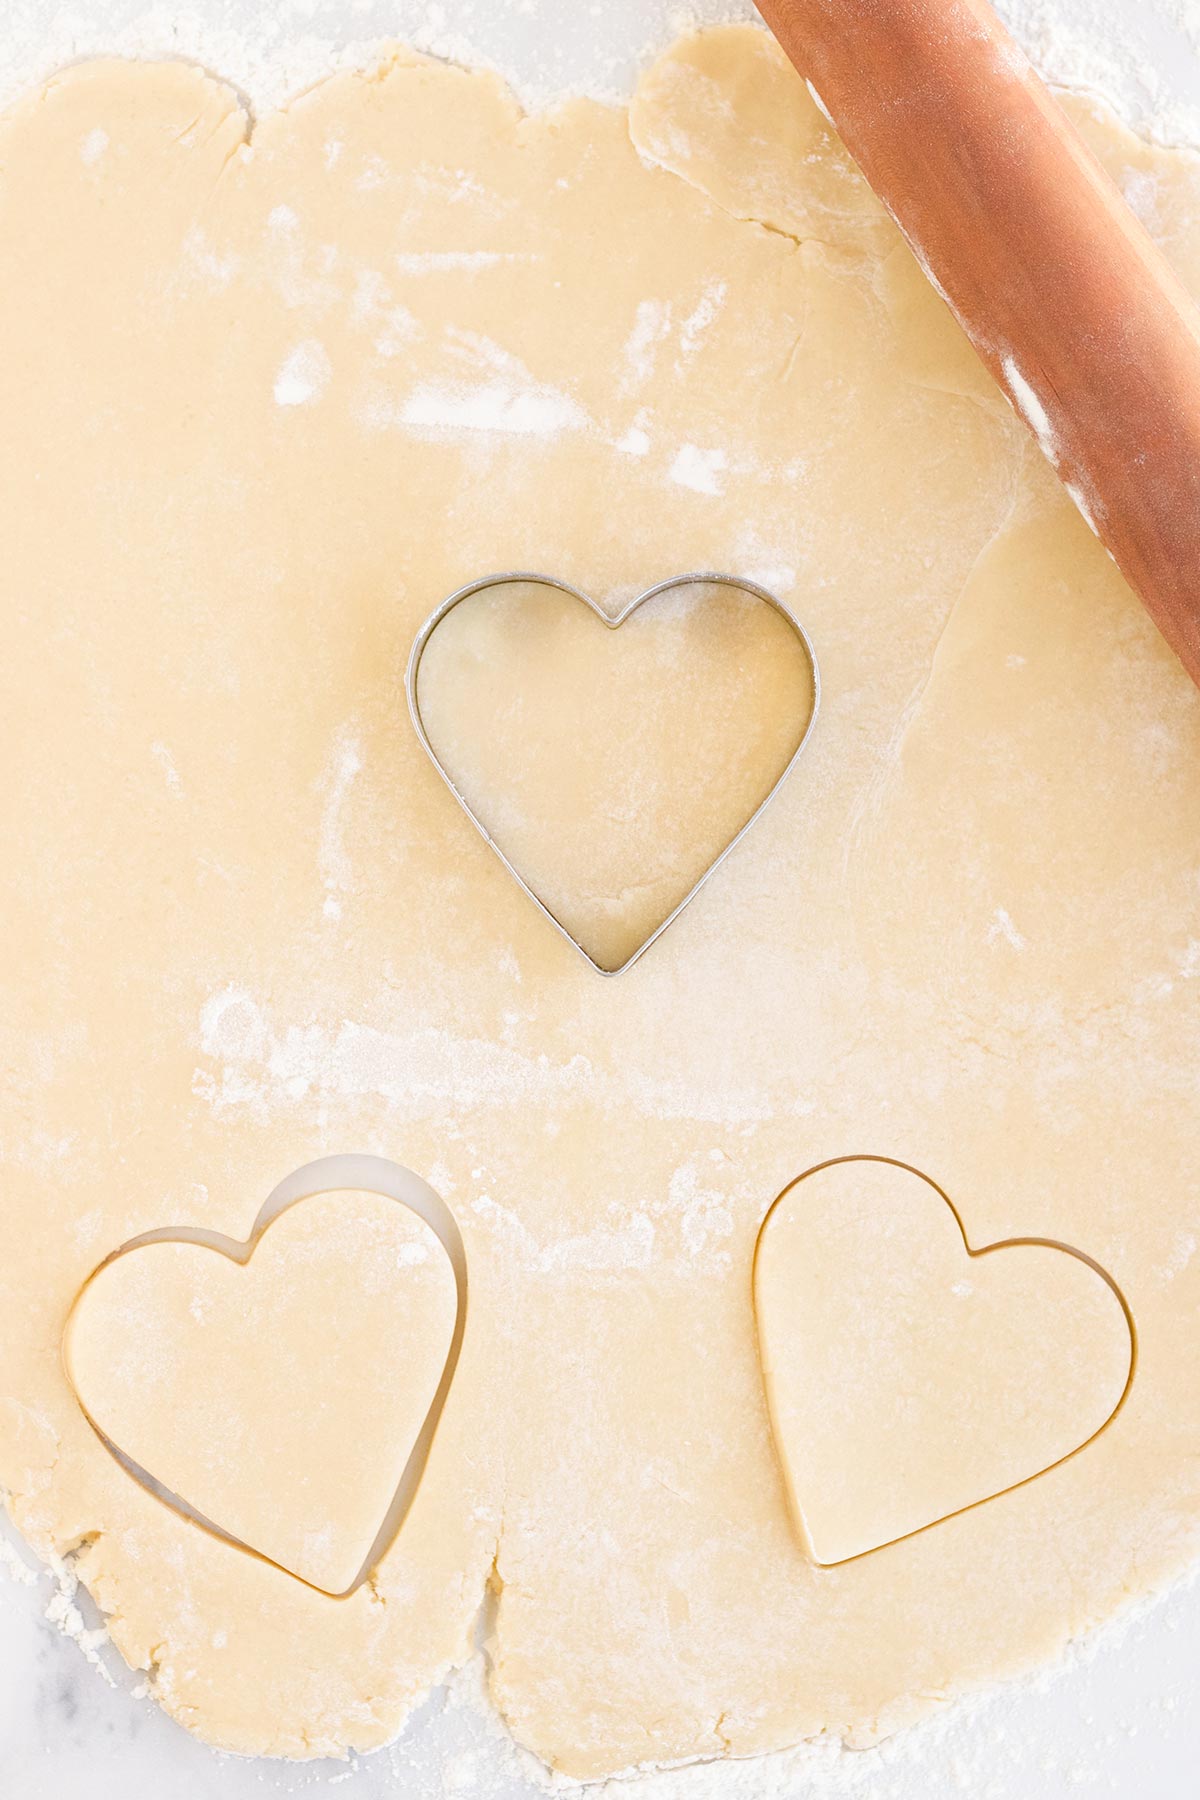 sugar cookie dough cutting out hearts for valentines cookies